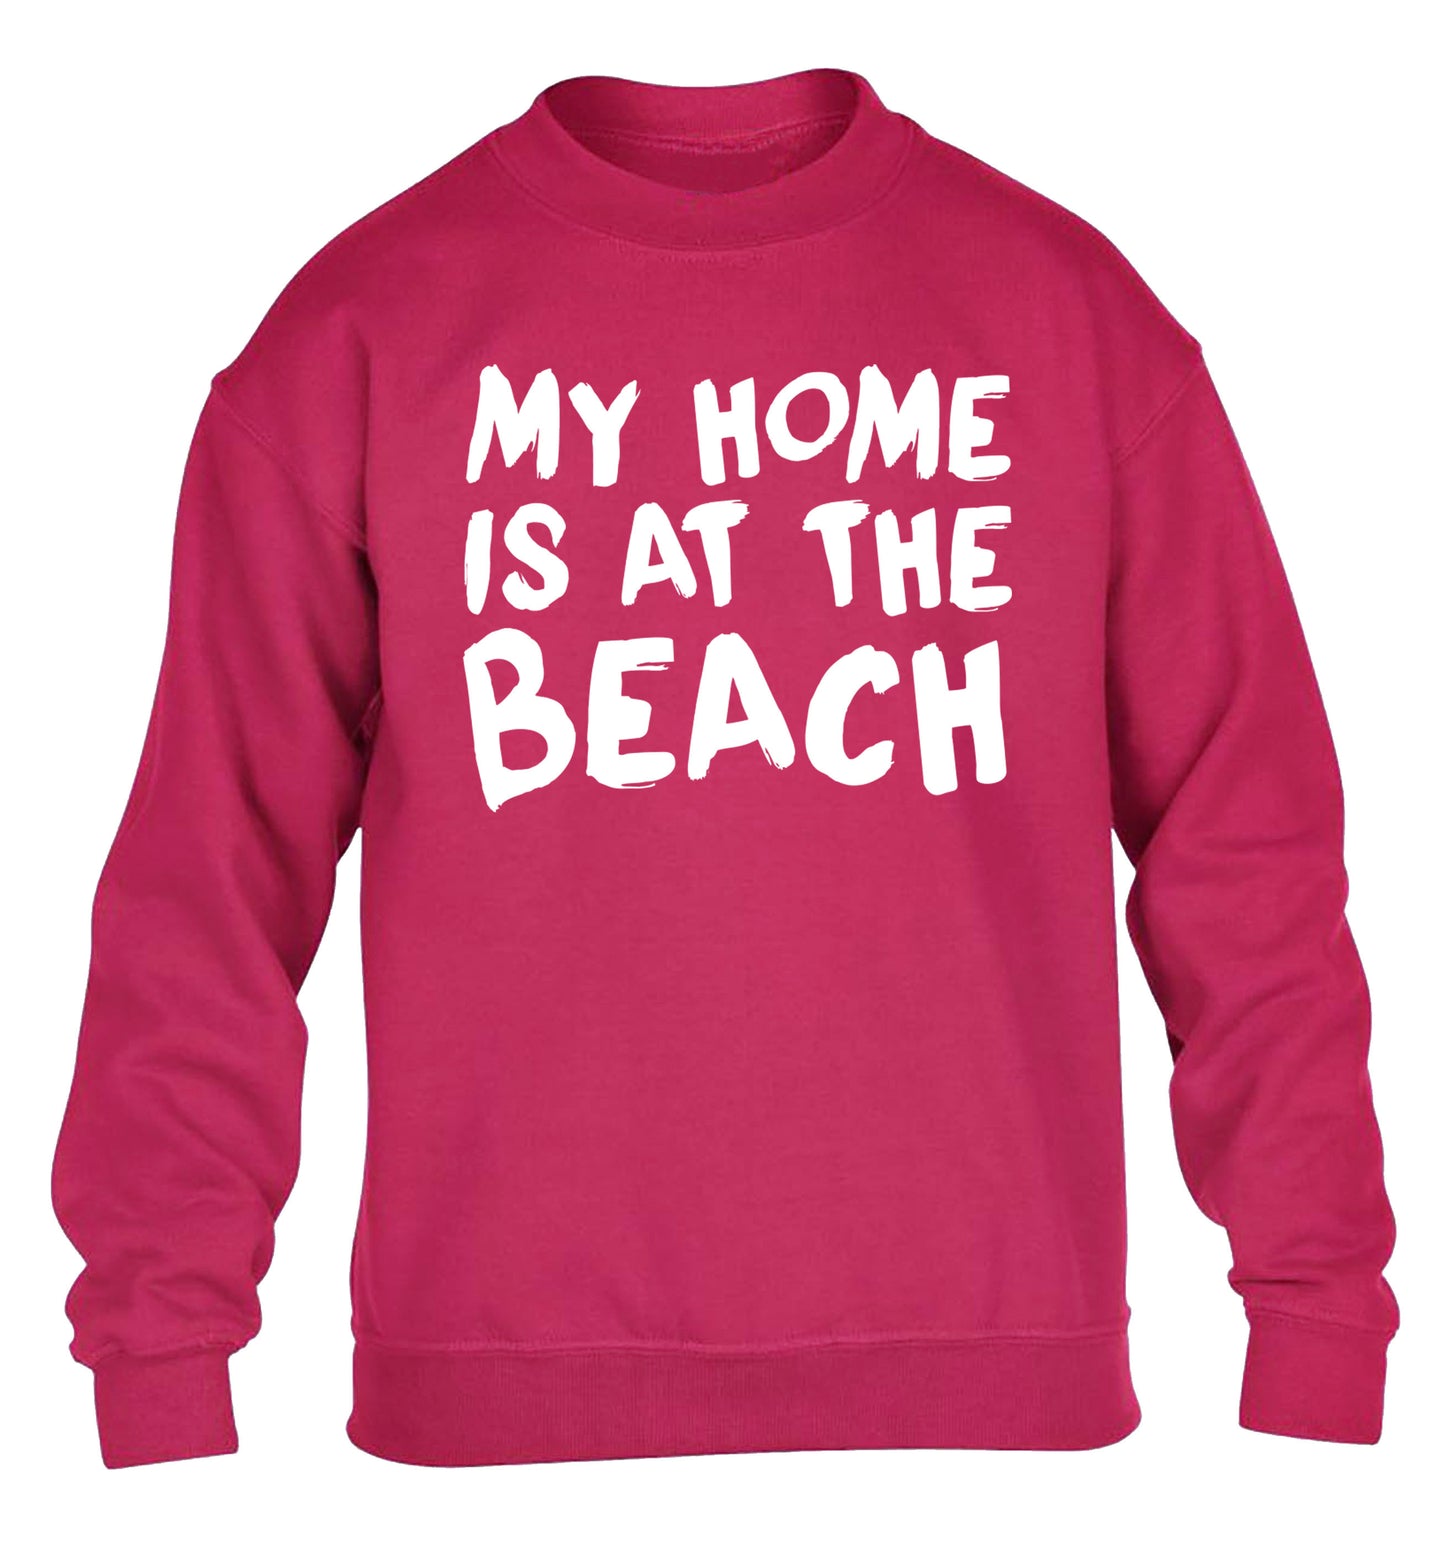 My home is at the beach children's pink sweater 12-14 Years